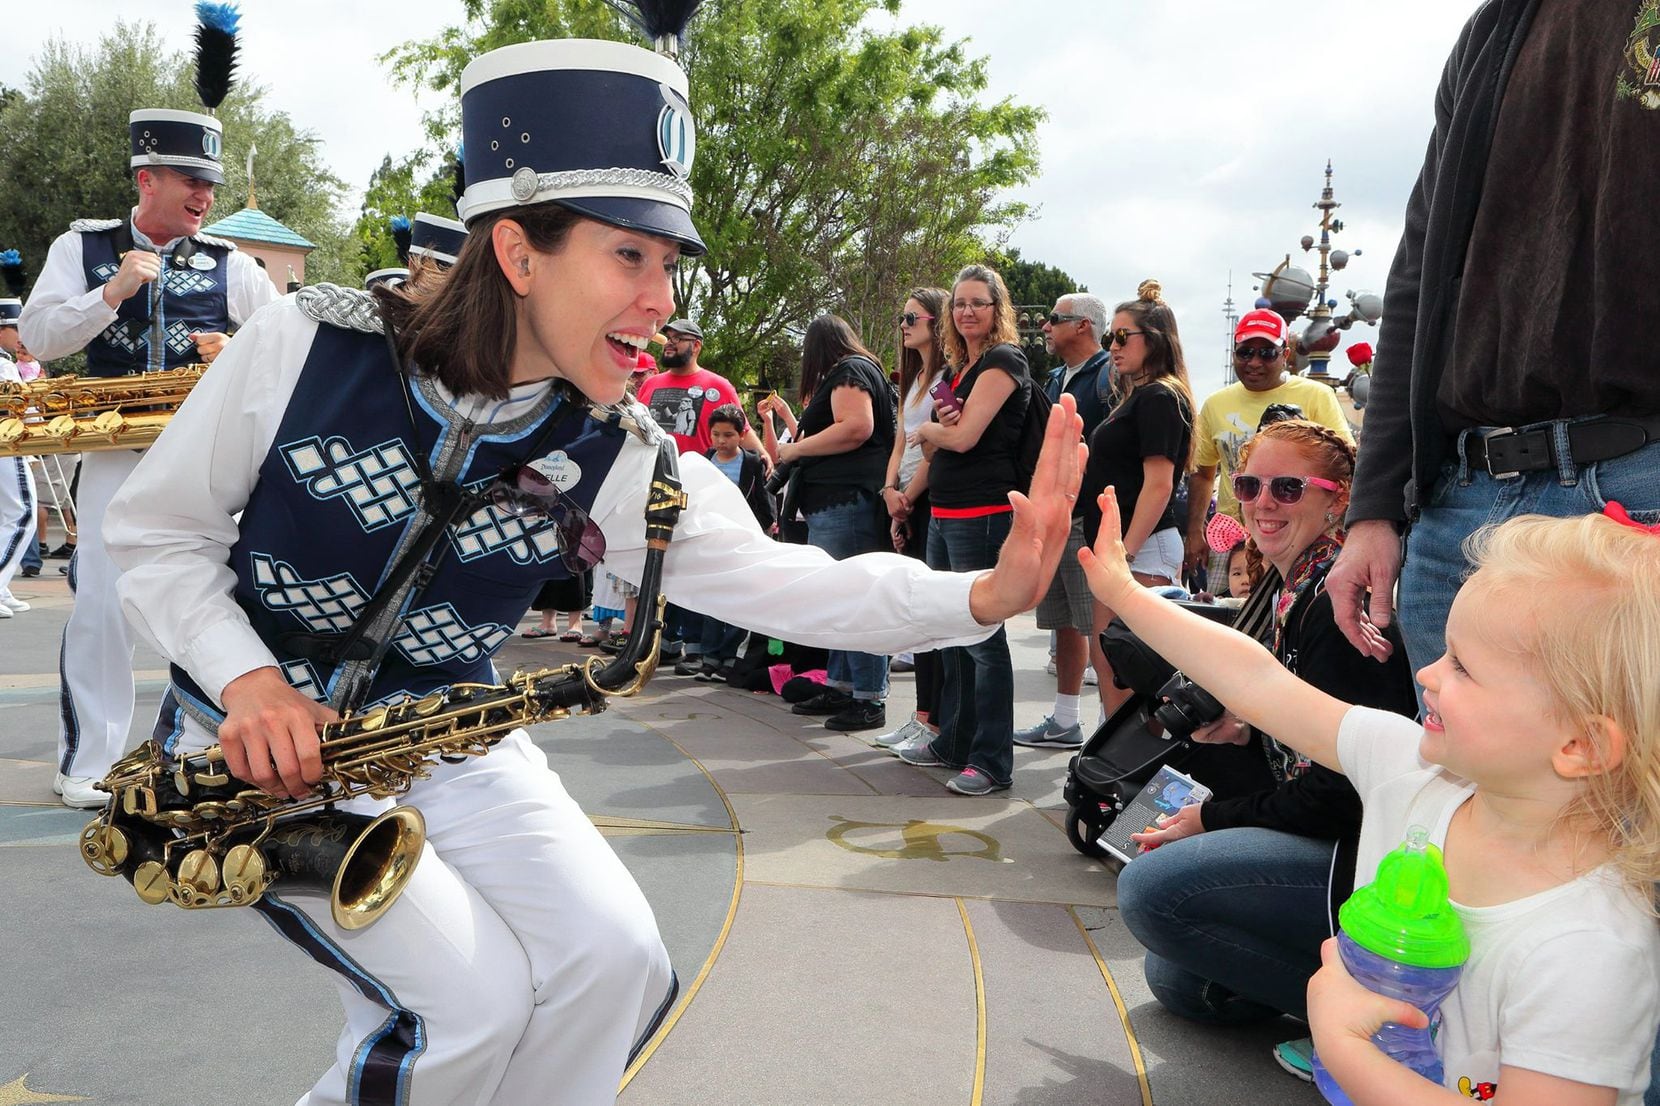 Noelle Fabian Dragon plays saxophone and other wind instruments in the Disneyland Band in...